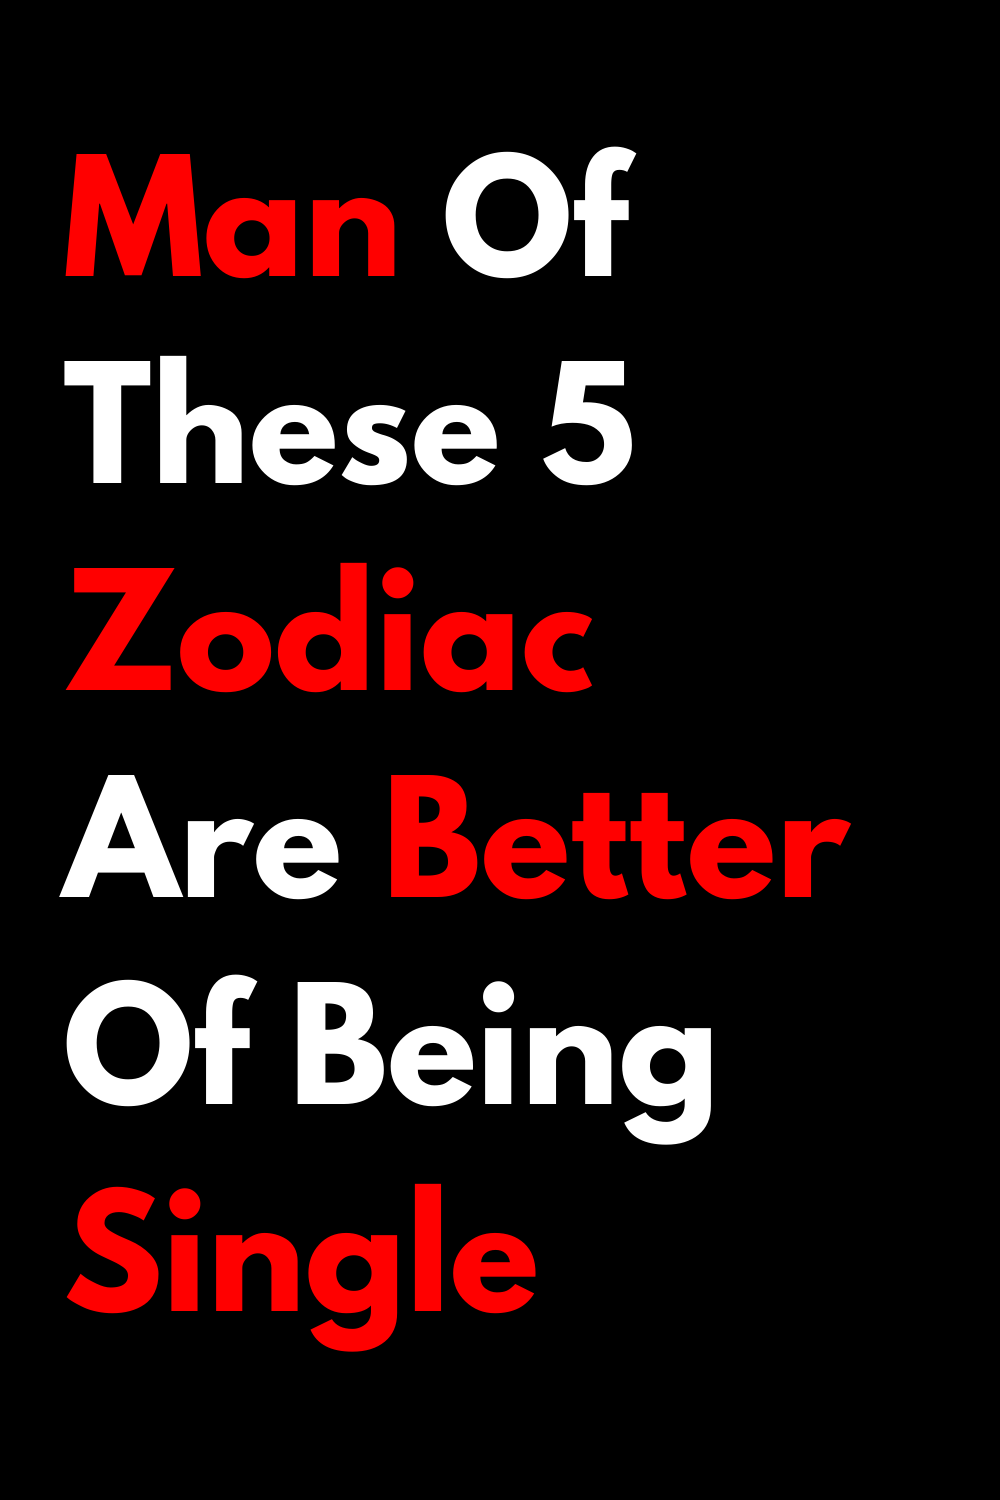 Man Of These 5 Zodiac Are Better Of Being Single